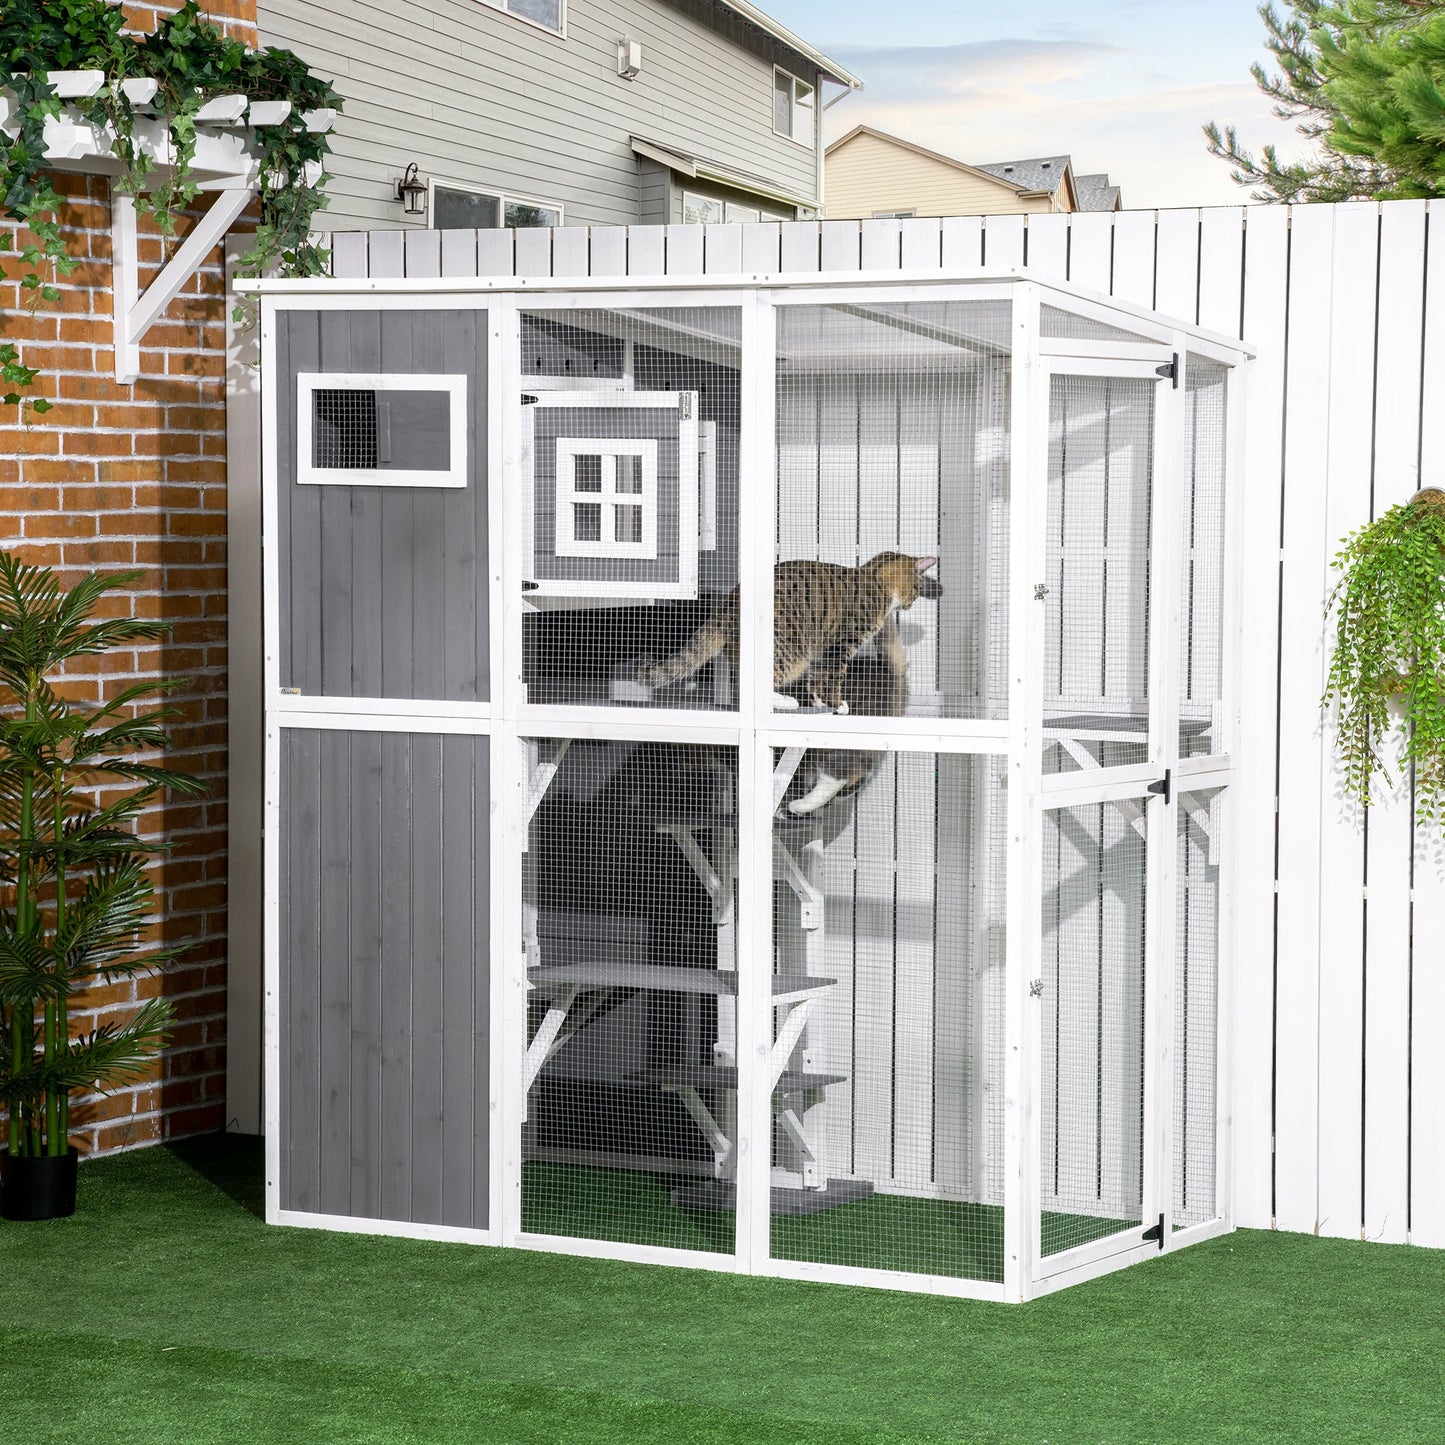 -PawHut Outdoor Cat House, Walk in Wooden Catio with PVC Weather Protection Roof, Multiple Platforms, Resting Condo, Enter Doors, Windows - Outdoor Style Company